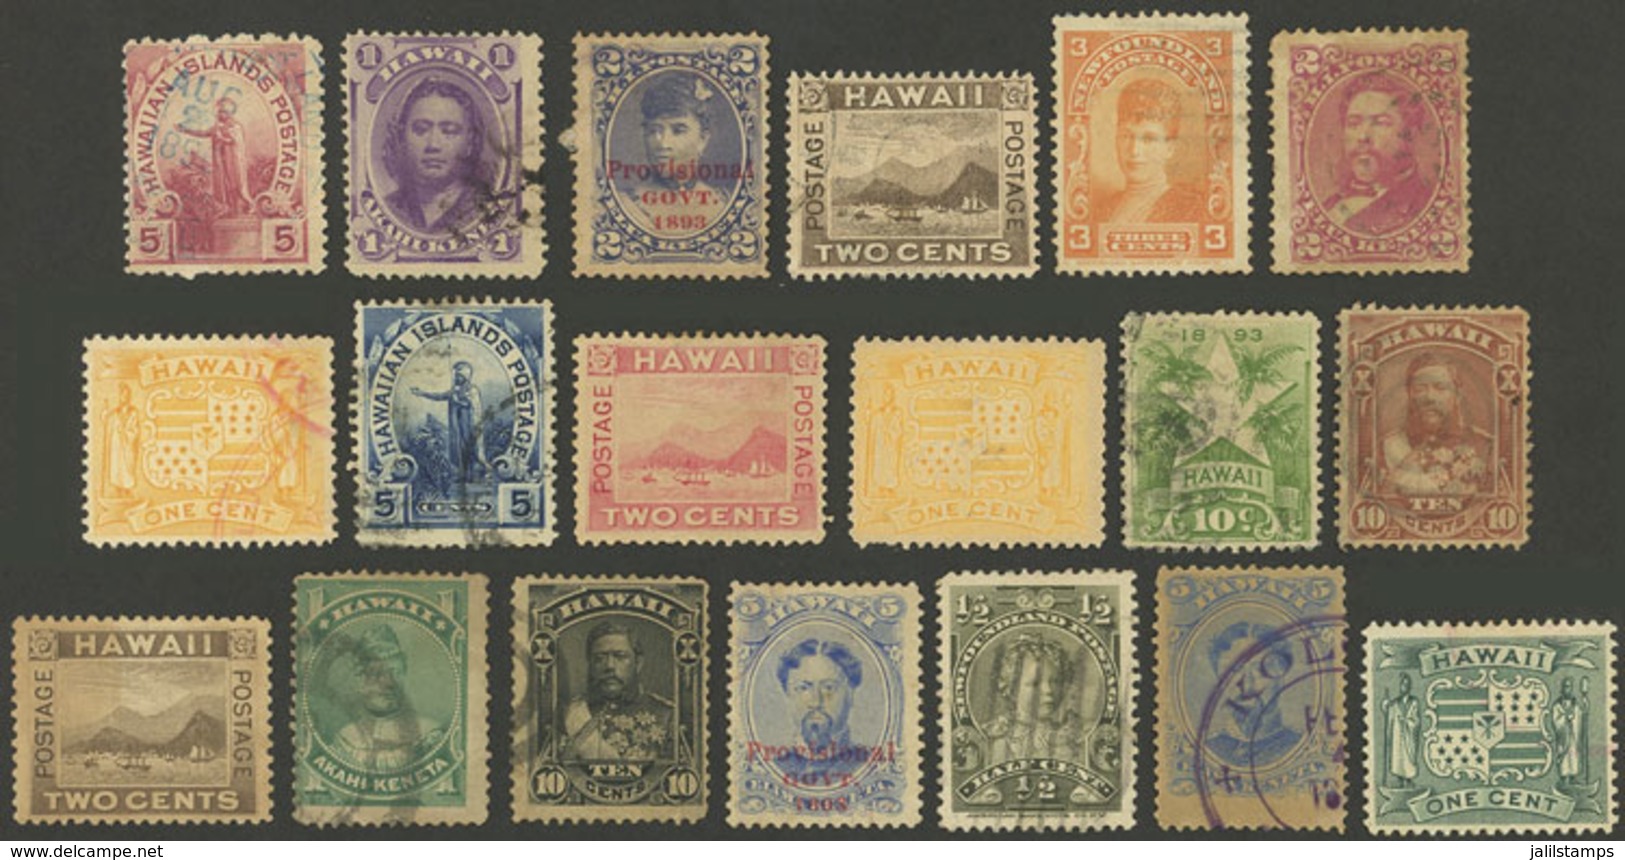 UNITED STATES - HAWAII: Small Lot With Some Old Stamps, Interesting! - Hawaii